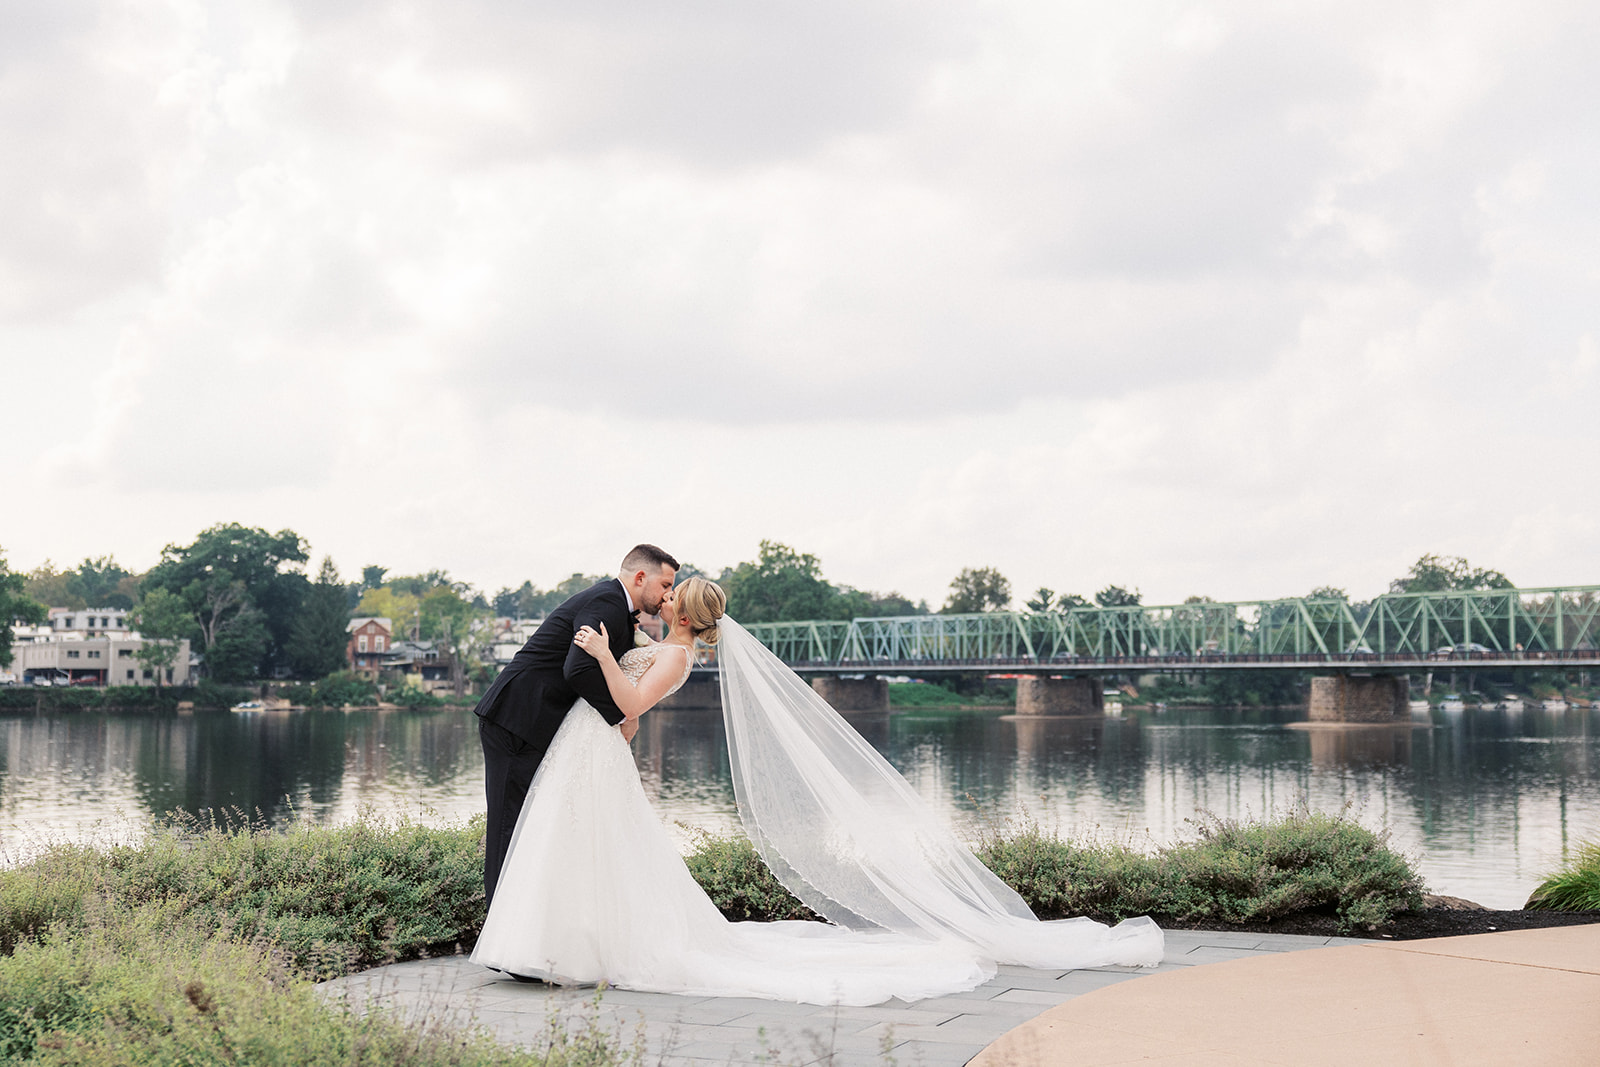 Newlyweds kiss on a lakefront sidewalk on a cloudy day